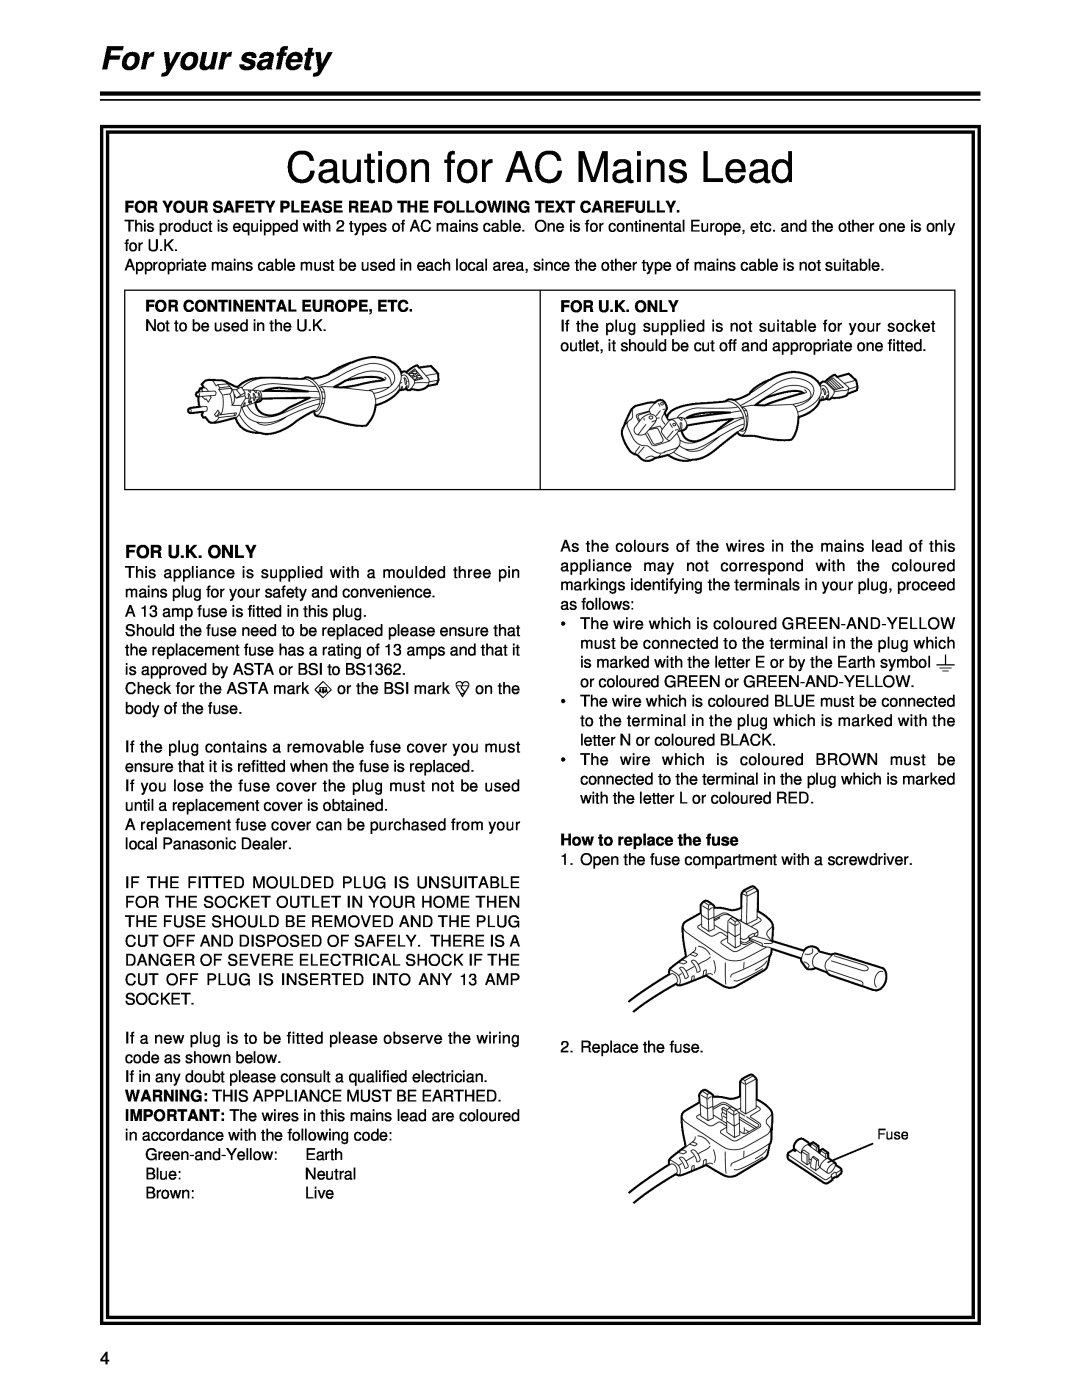 Panasonic AJ-HD1700PE Caution for AC Mains Lead, For your safety, For Your Safety Please Read The Following Text Carefully 